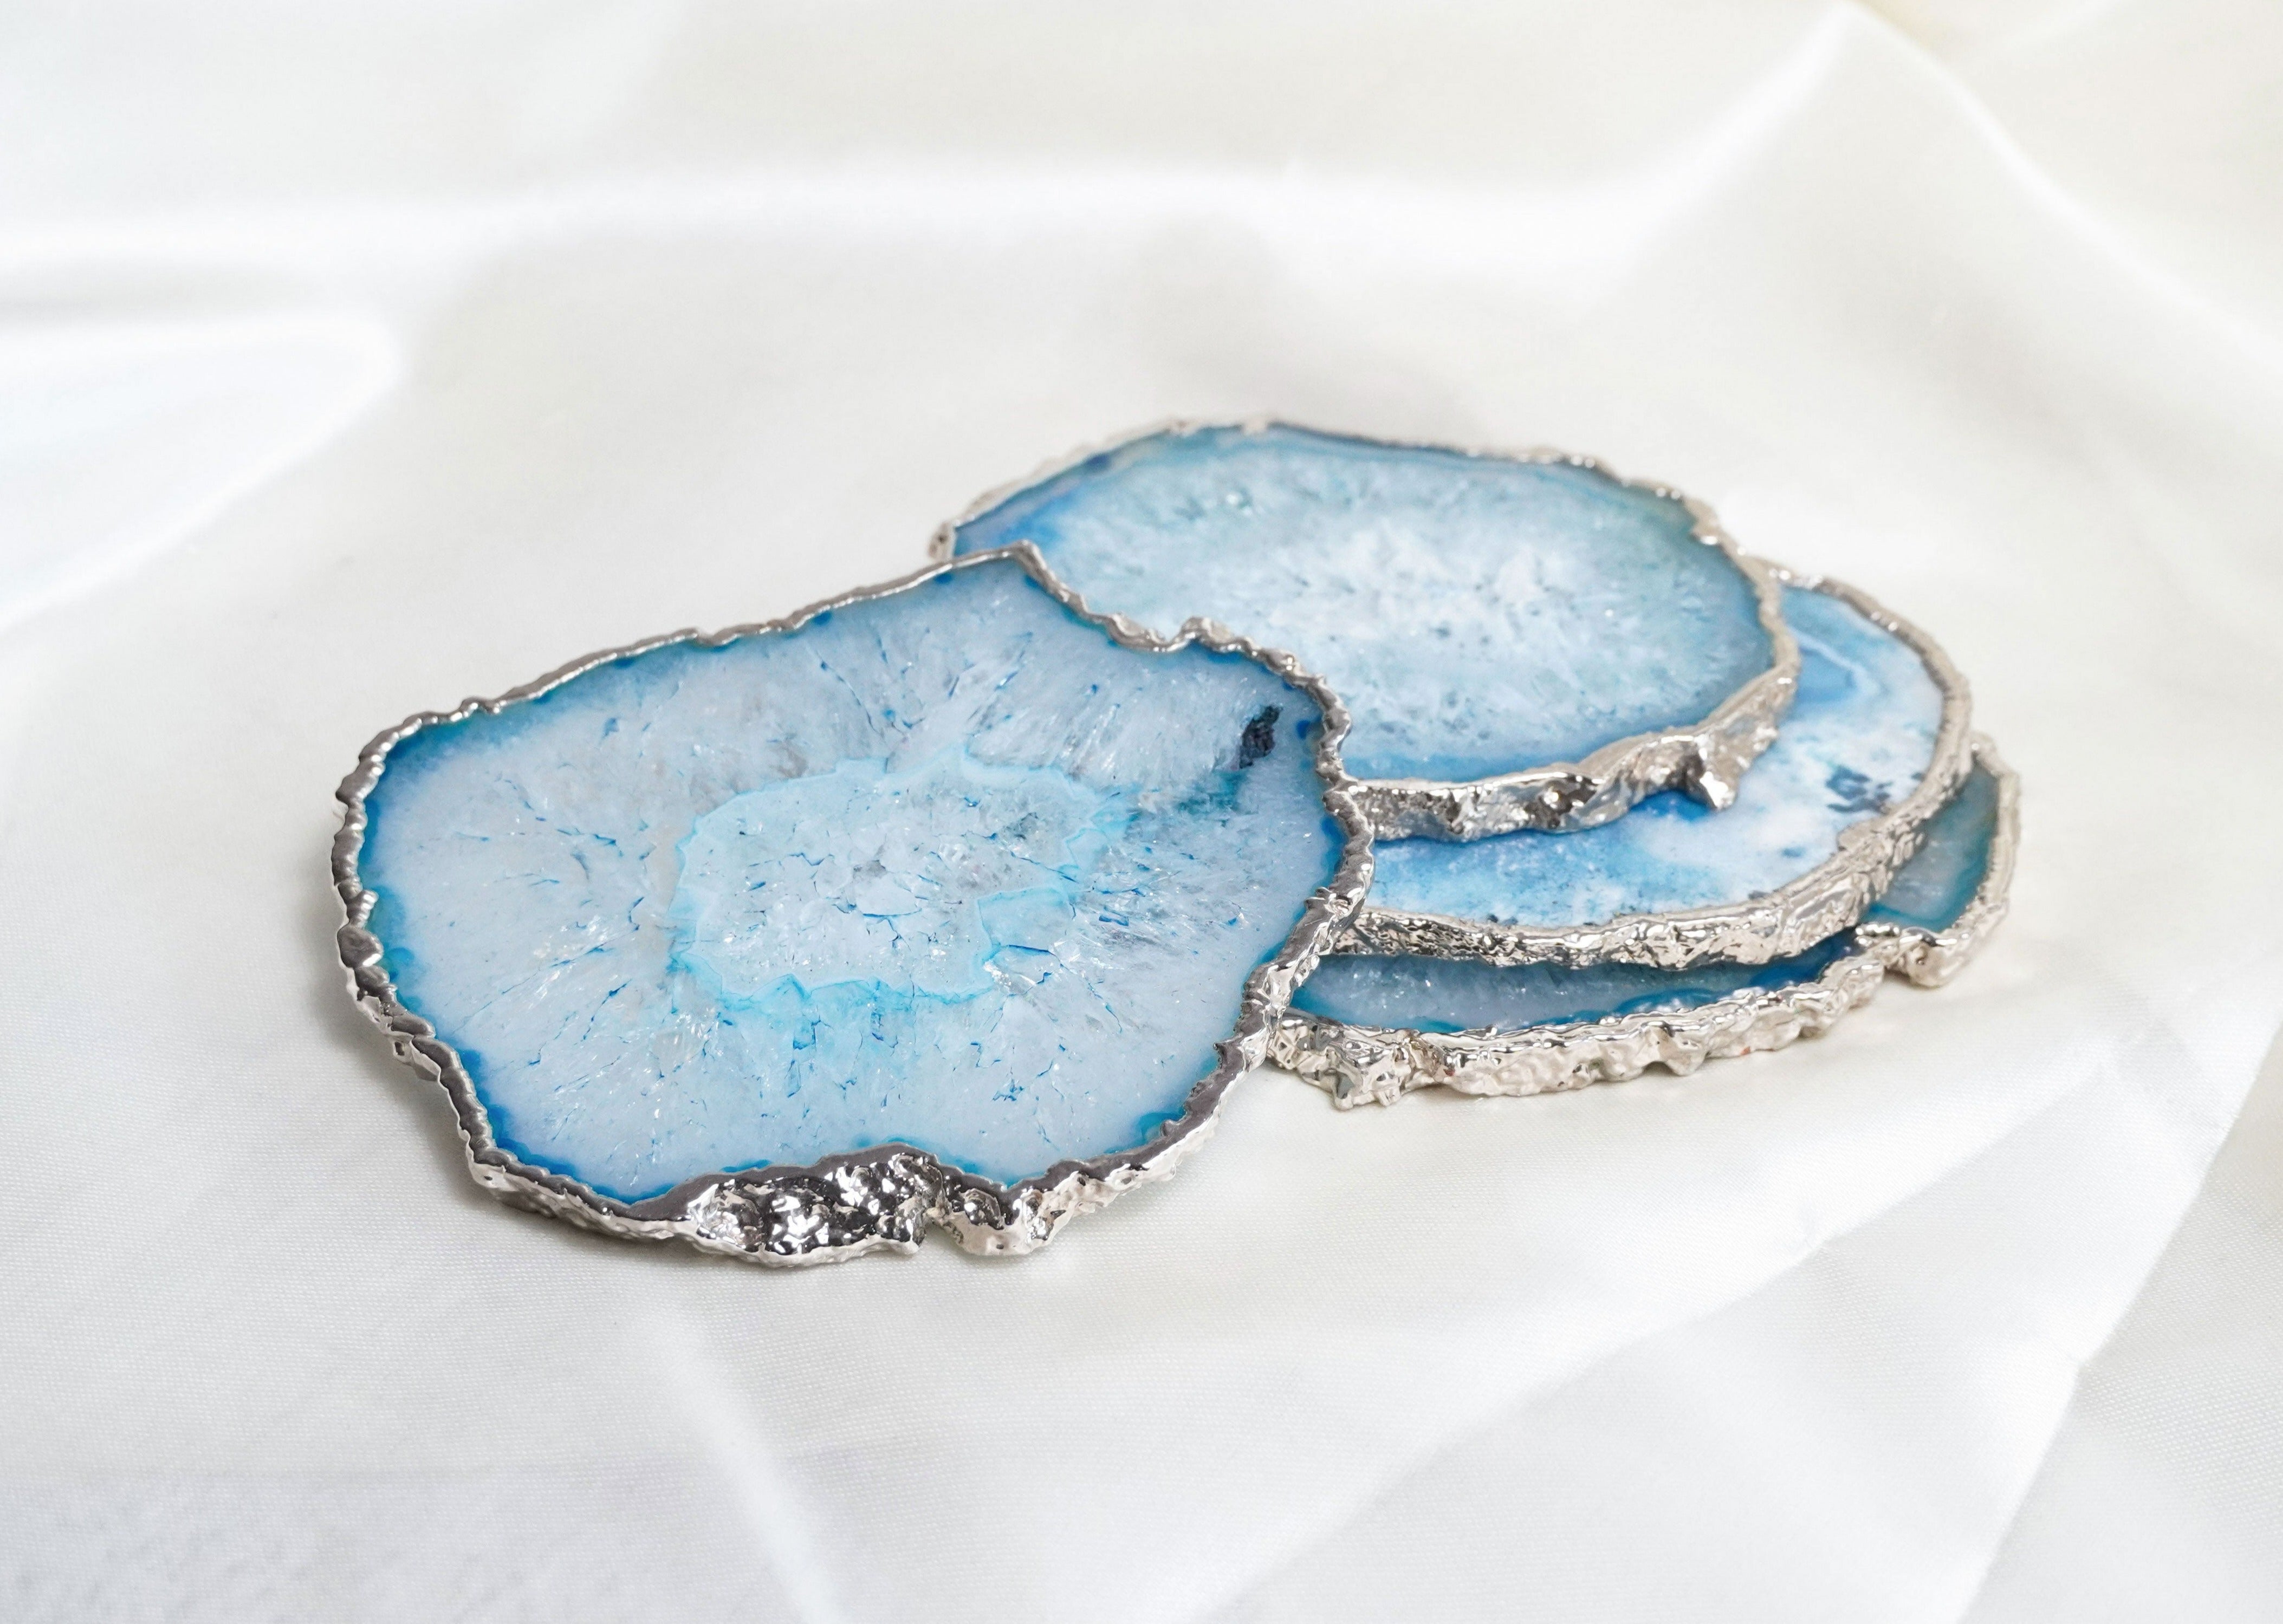 Albania BIBELOT Agate Handcrafted Luxury Silver Plated Coasters (Cloud Blue)